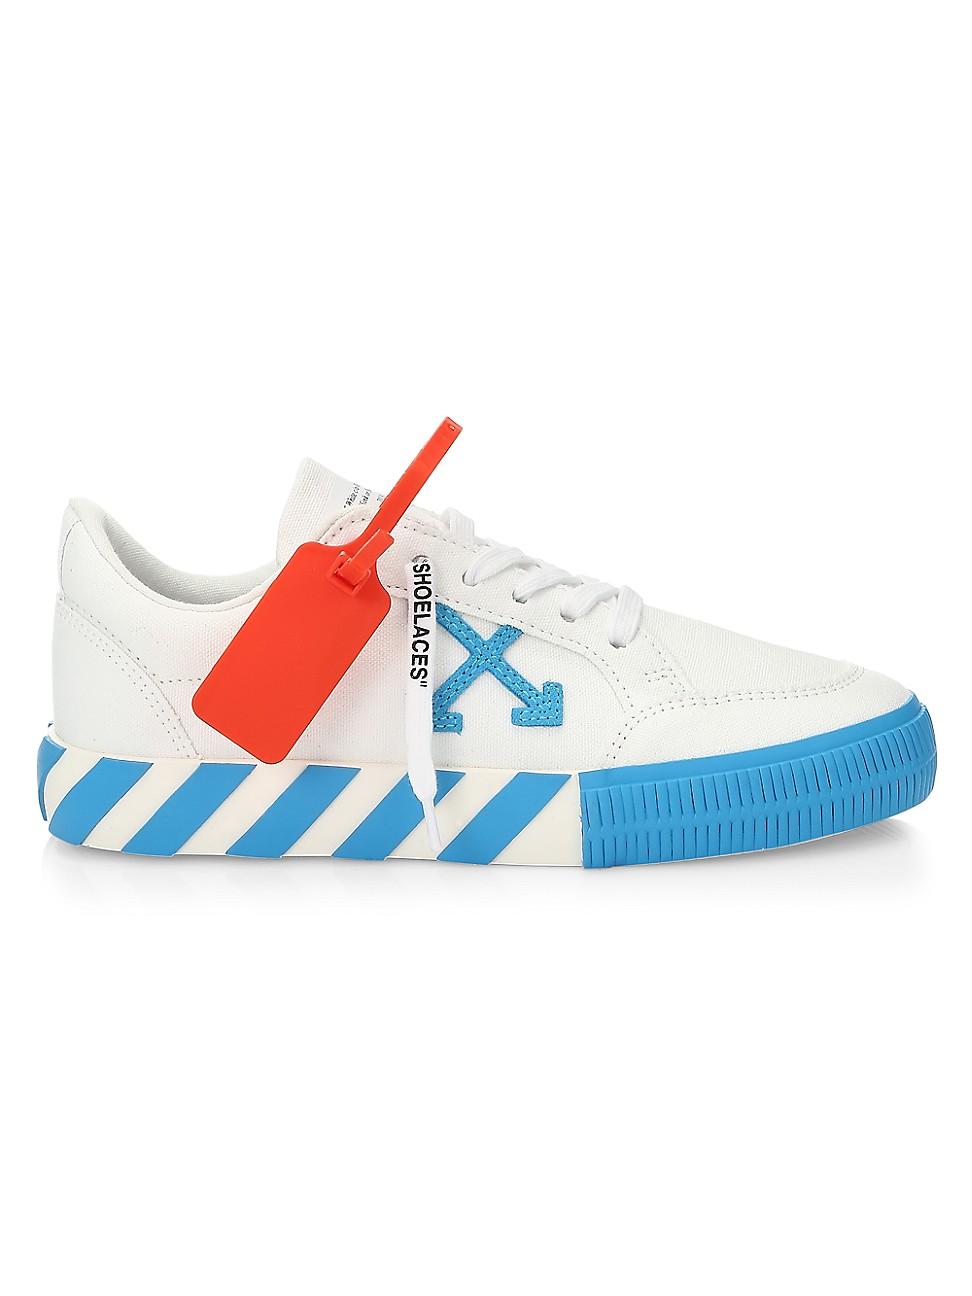 off white blue and white sneakers